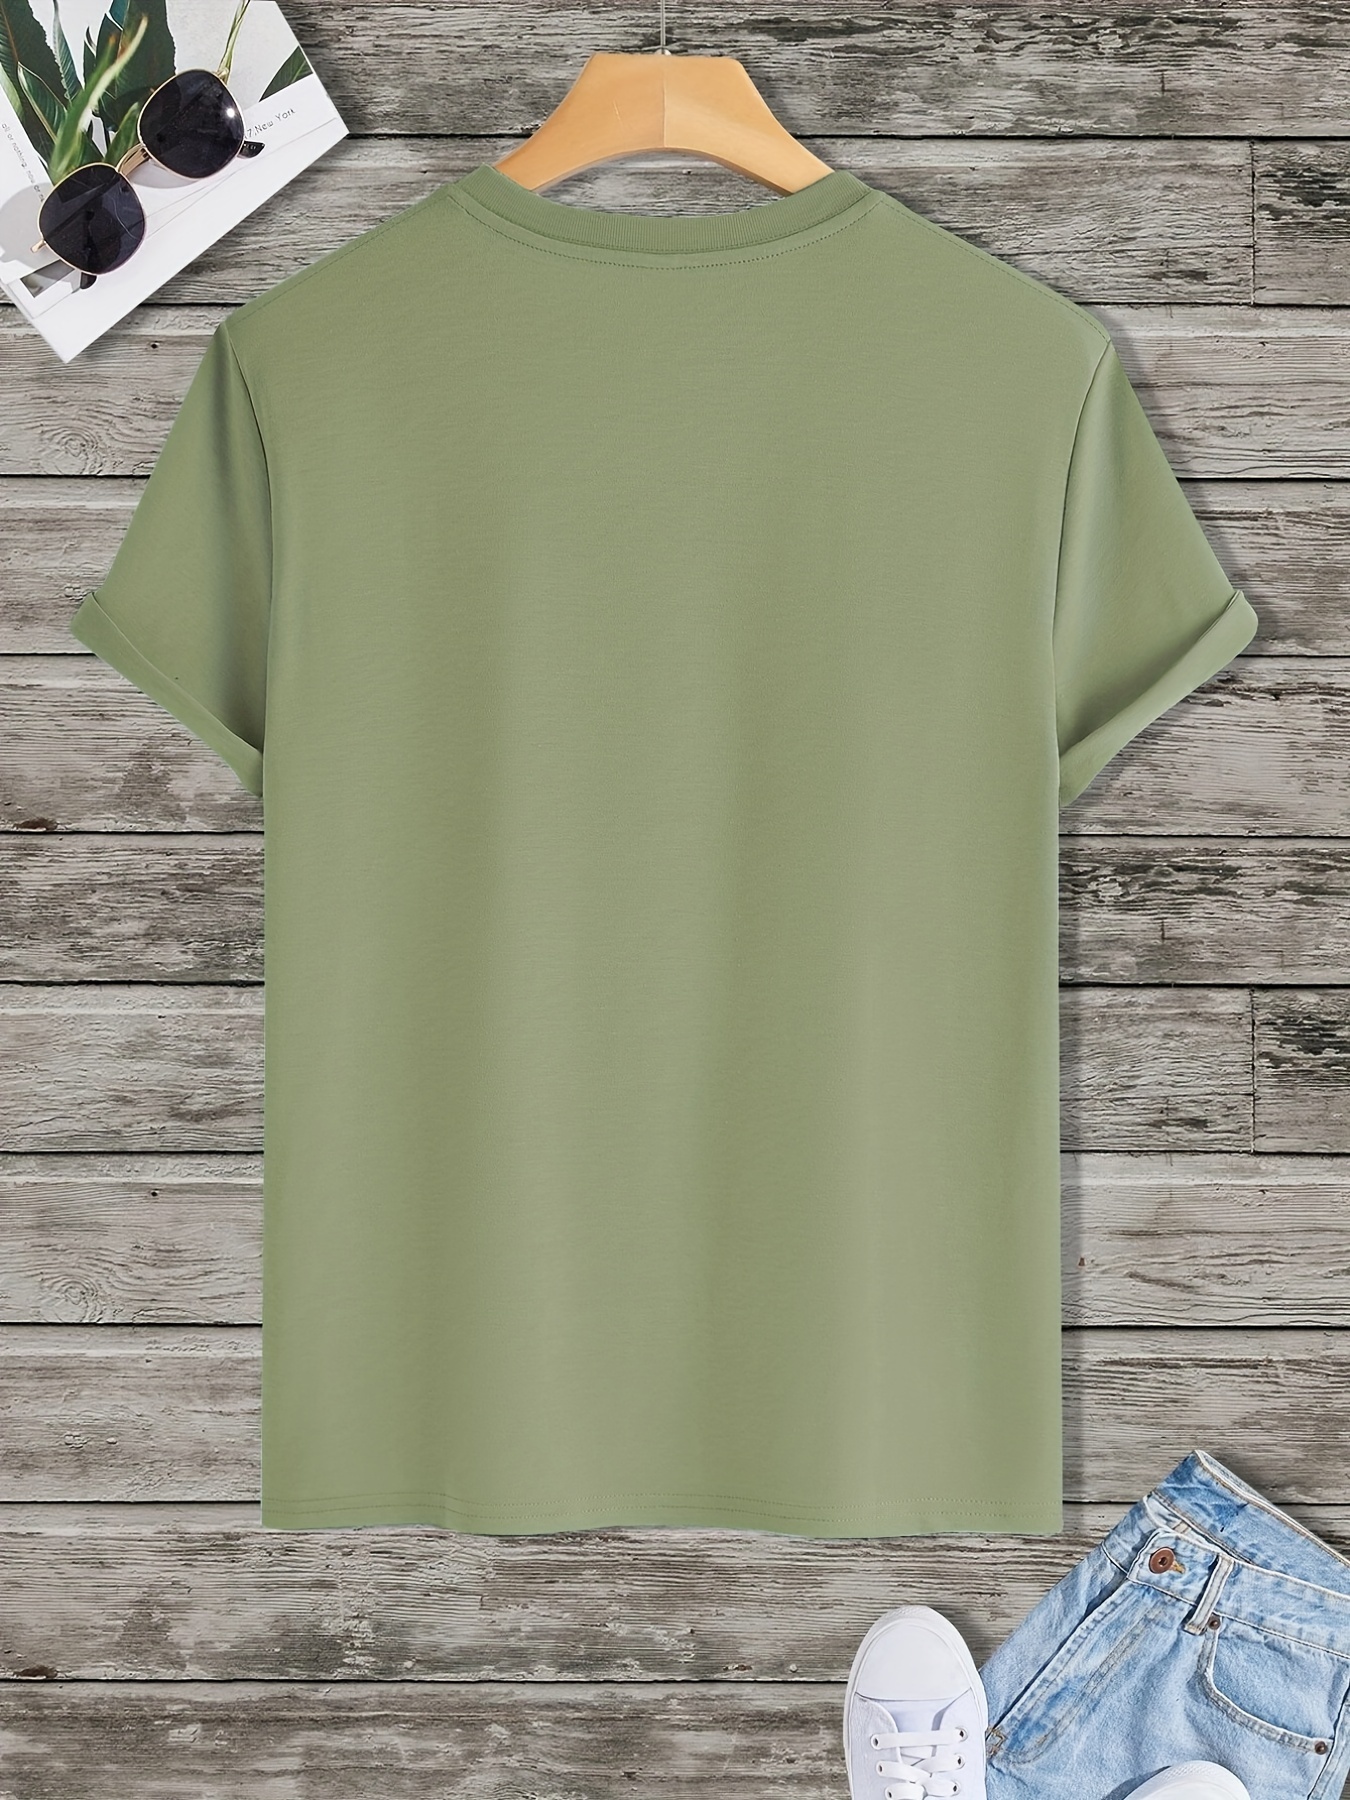 Sleepynuts Round Neck Plain Cotton T-Shirt for Men Pack of 4 (Army, Mint  Green, Sky Blue, Navy Milli,S) : : Fashion